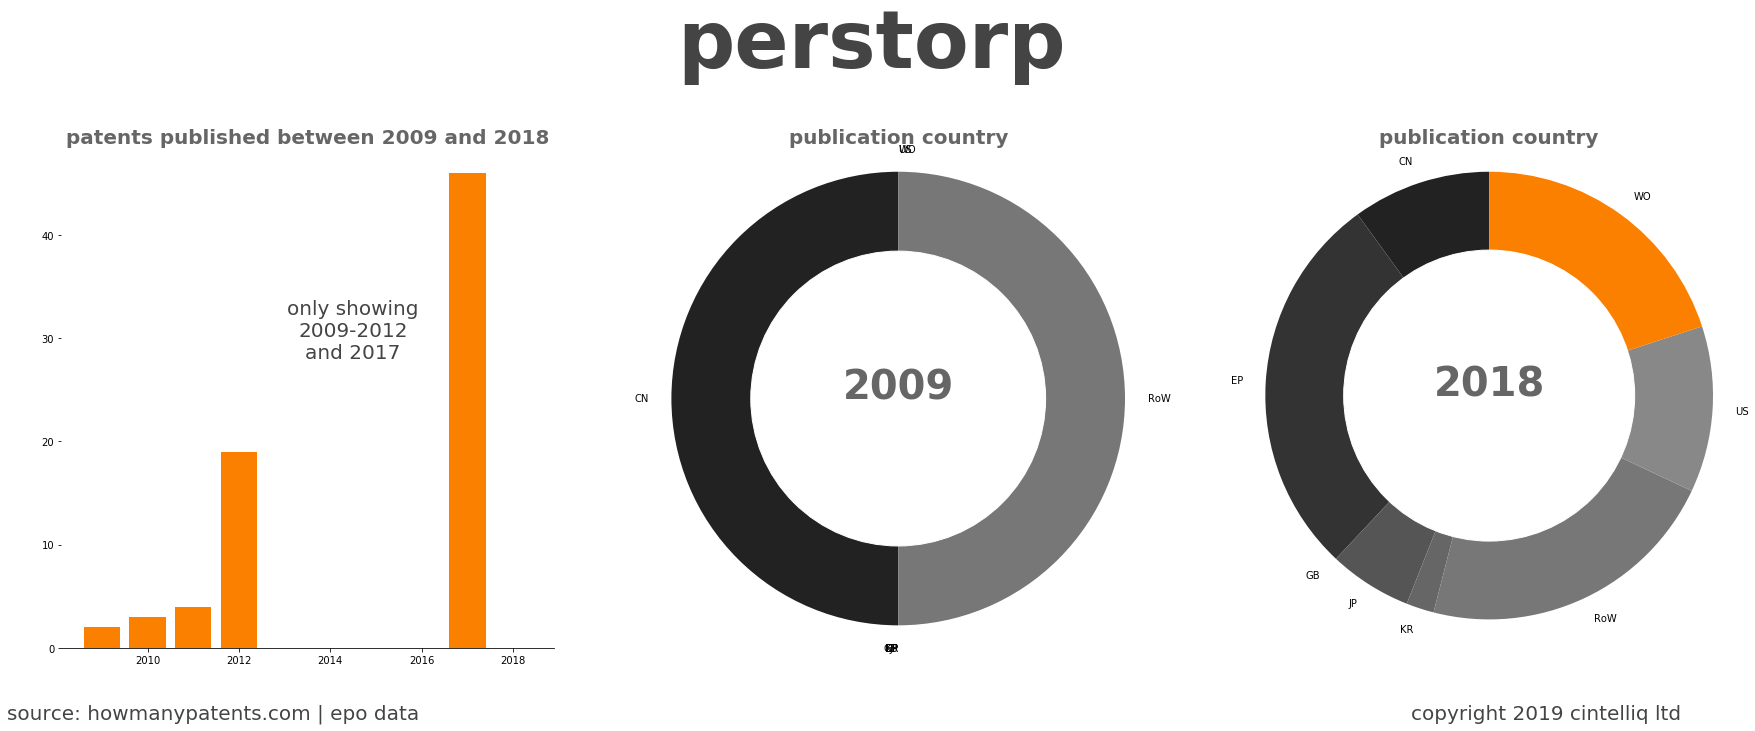 summary of patents for Perstorp